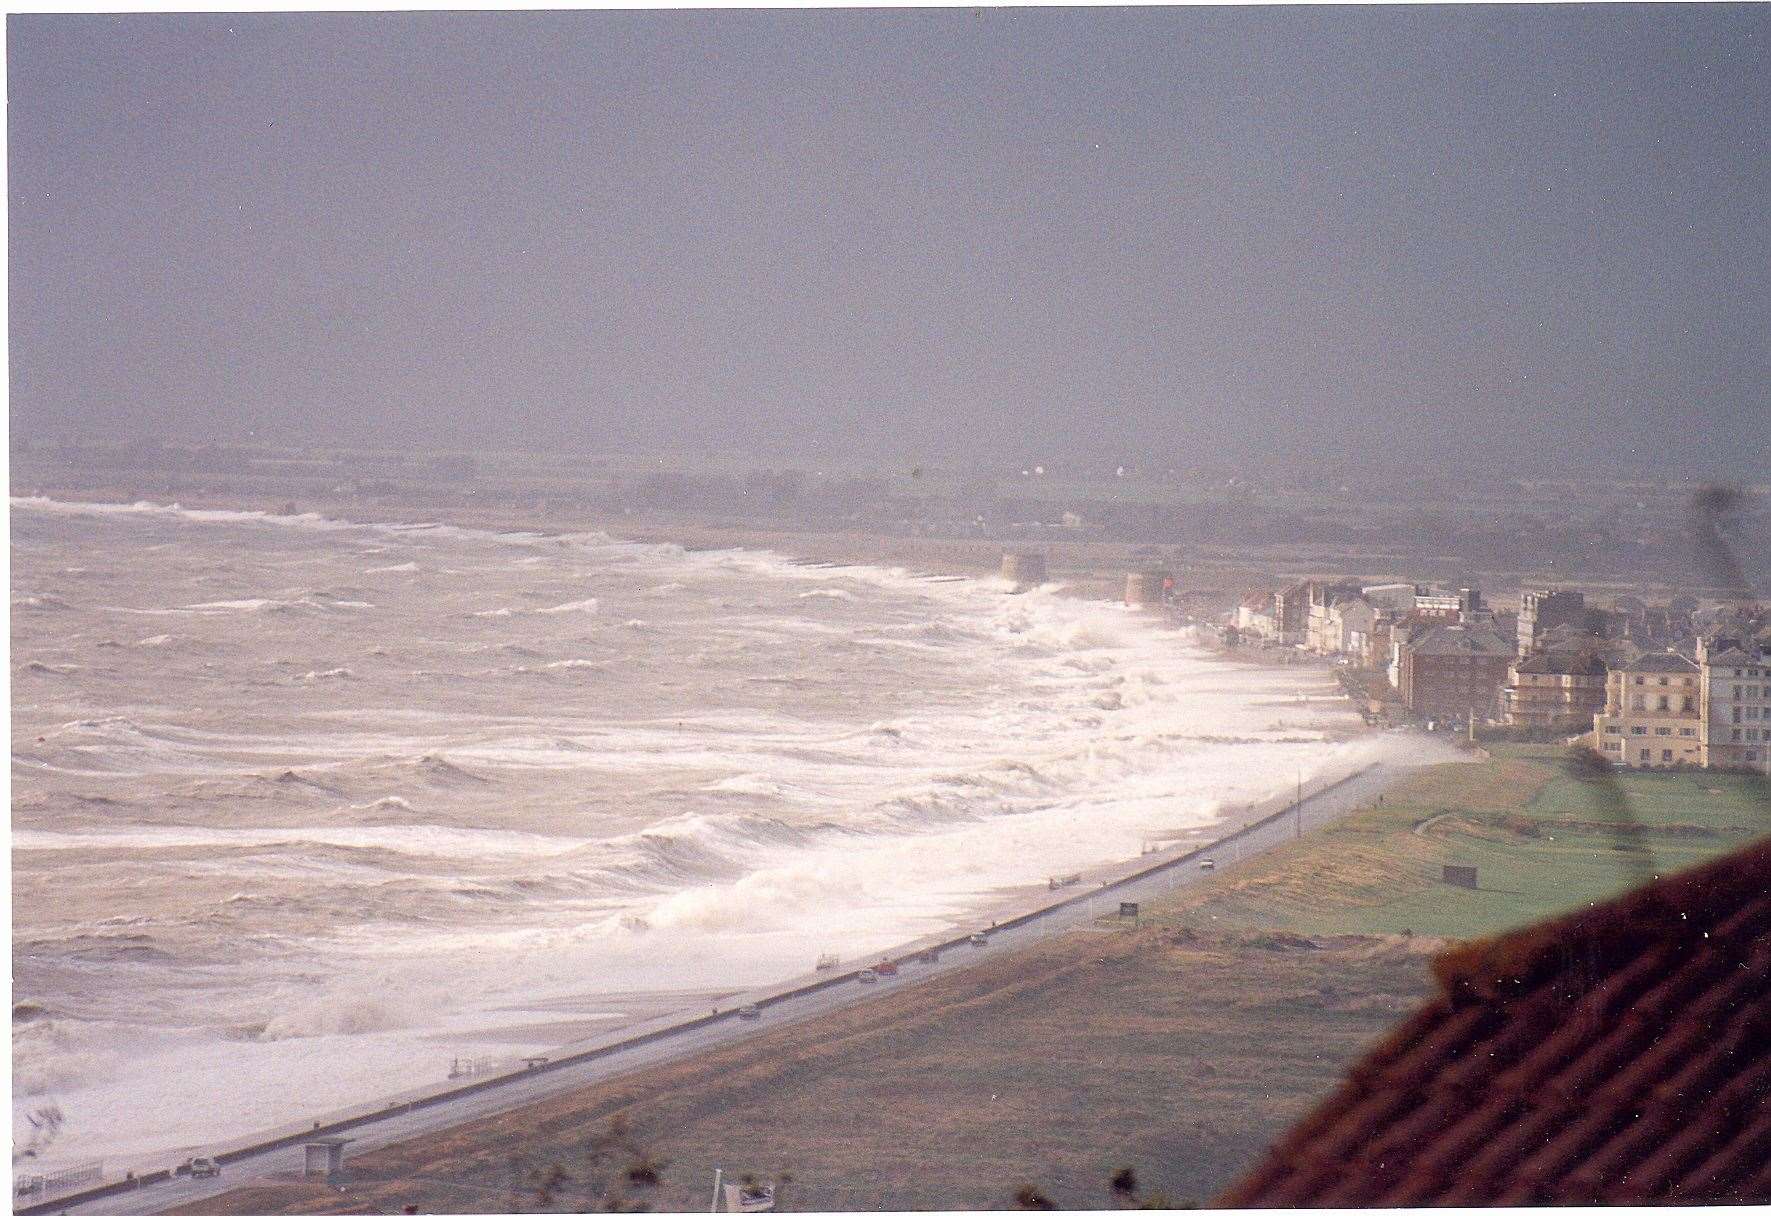 The sea raging at Hythe seafront during the Great Storm of 1987. (29624854)